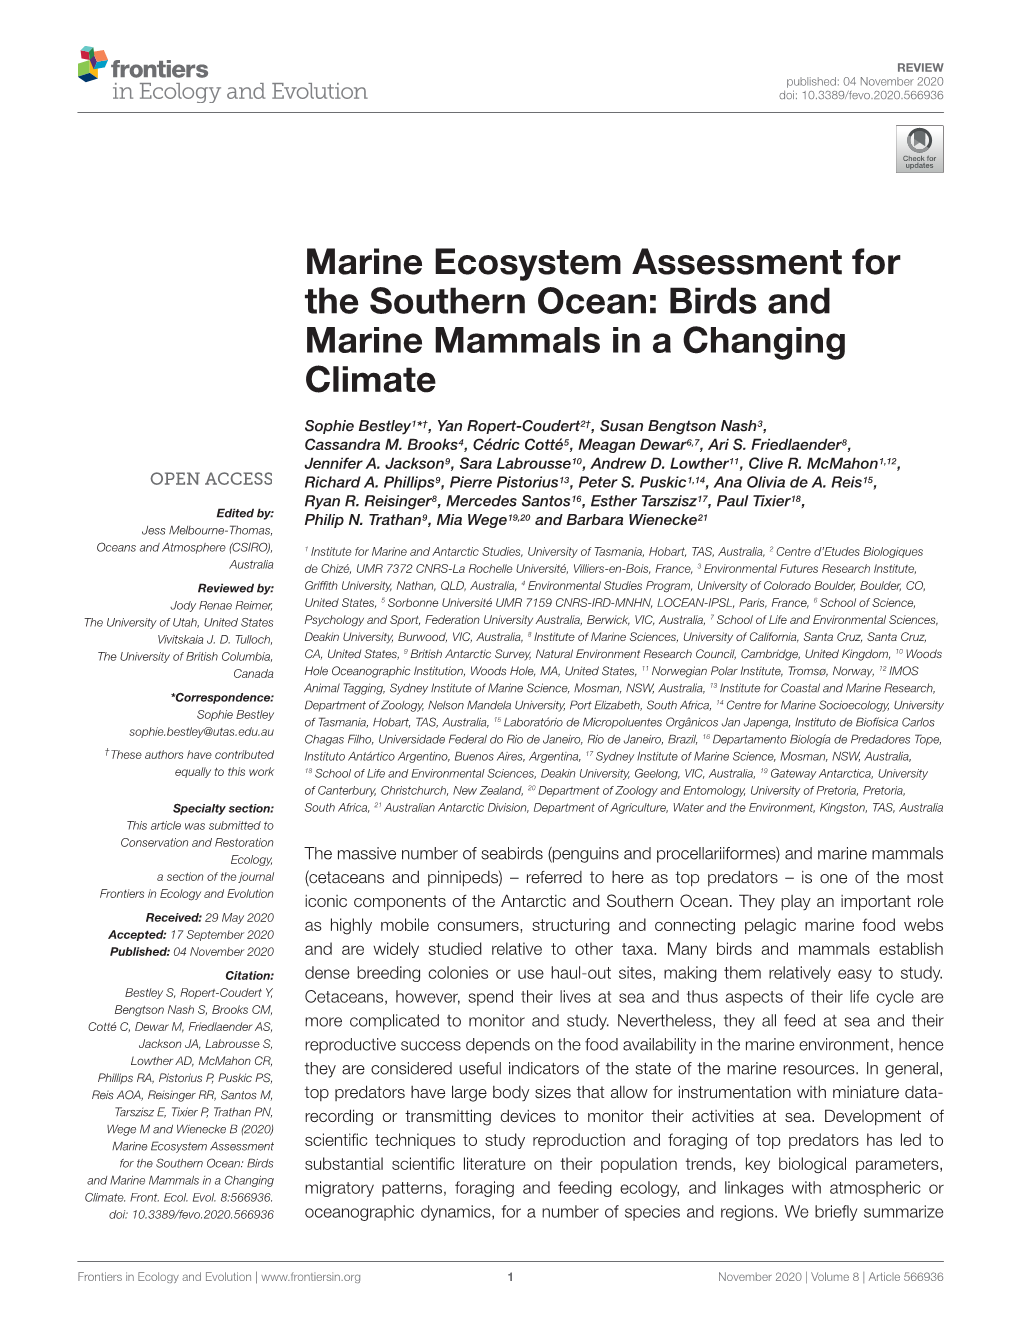 Birds and Marine Mammals in a Changing Climate